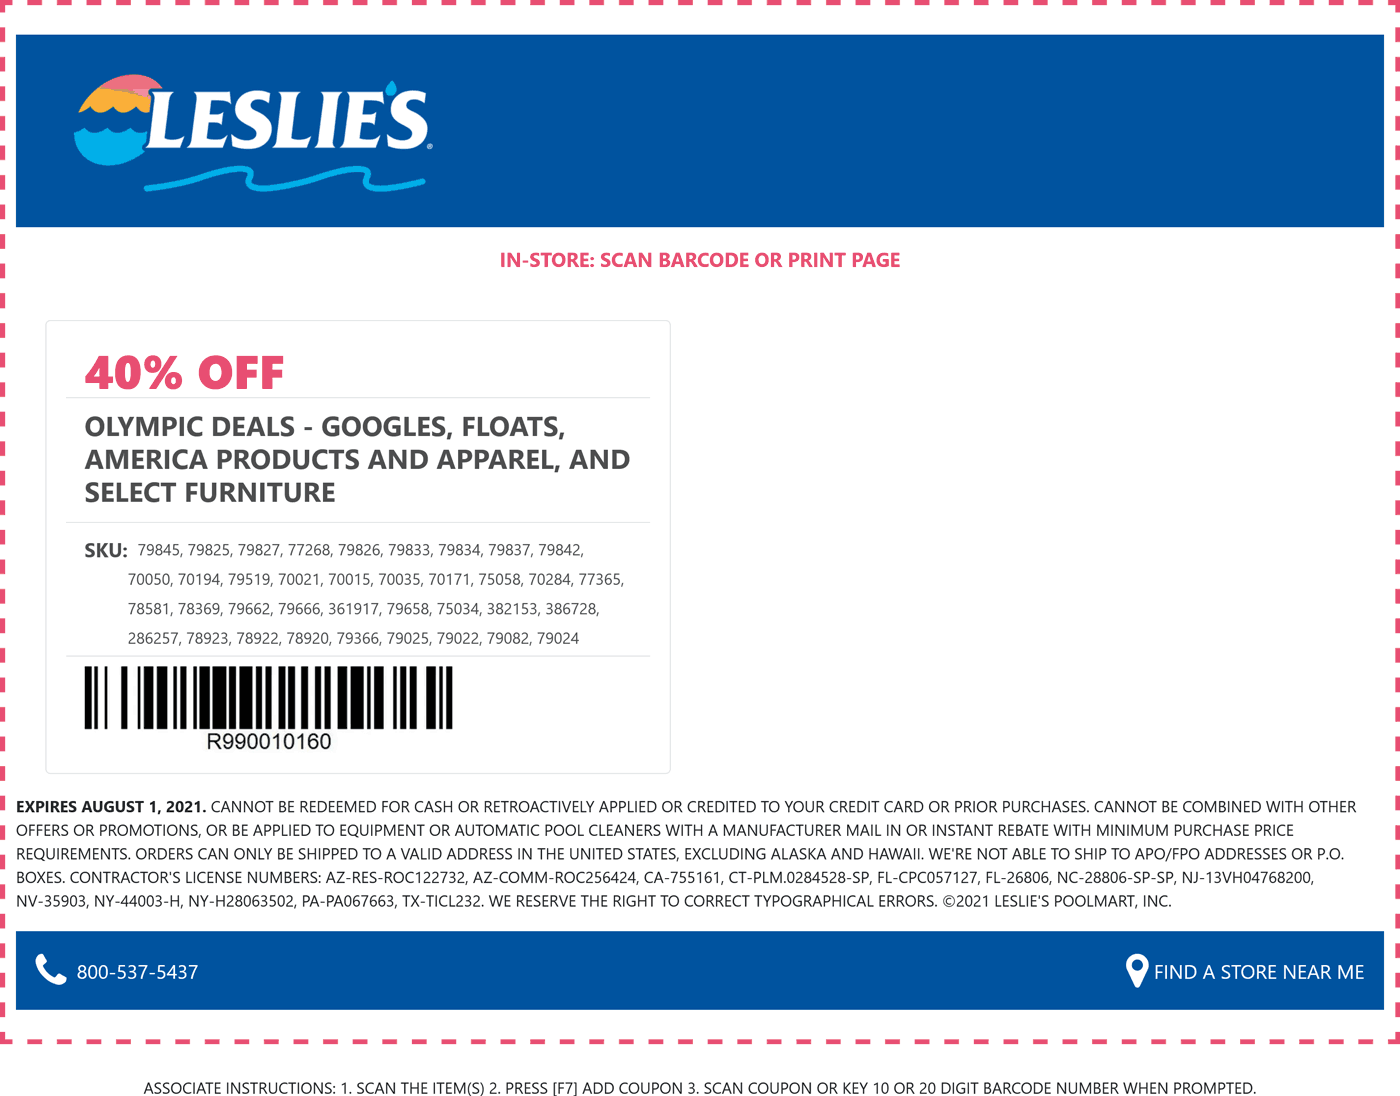 Leslies Pool Supplies coupons & promo code for [December 2022]